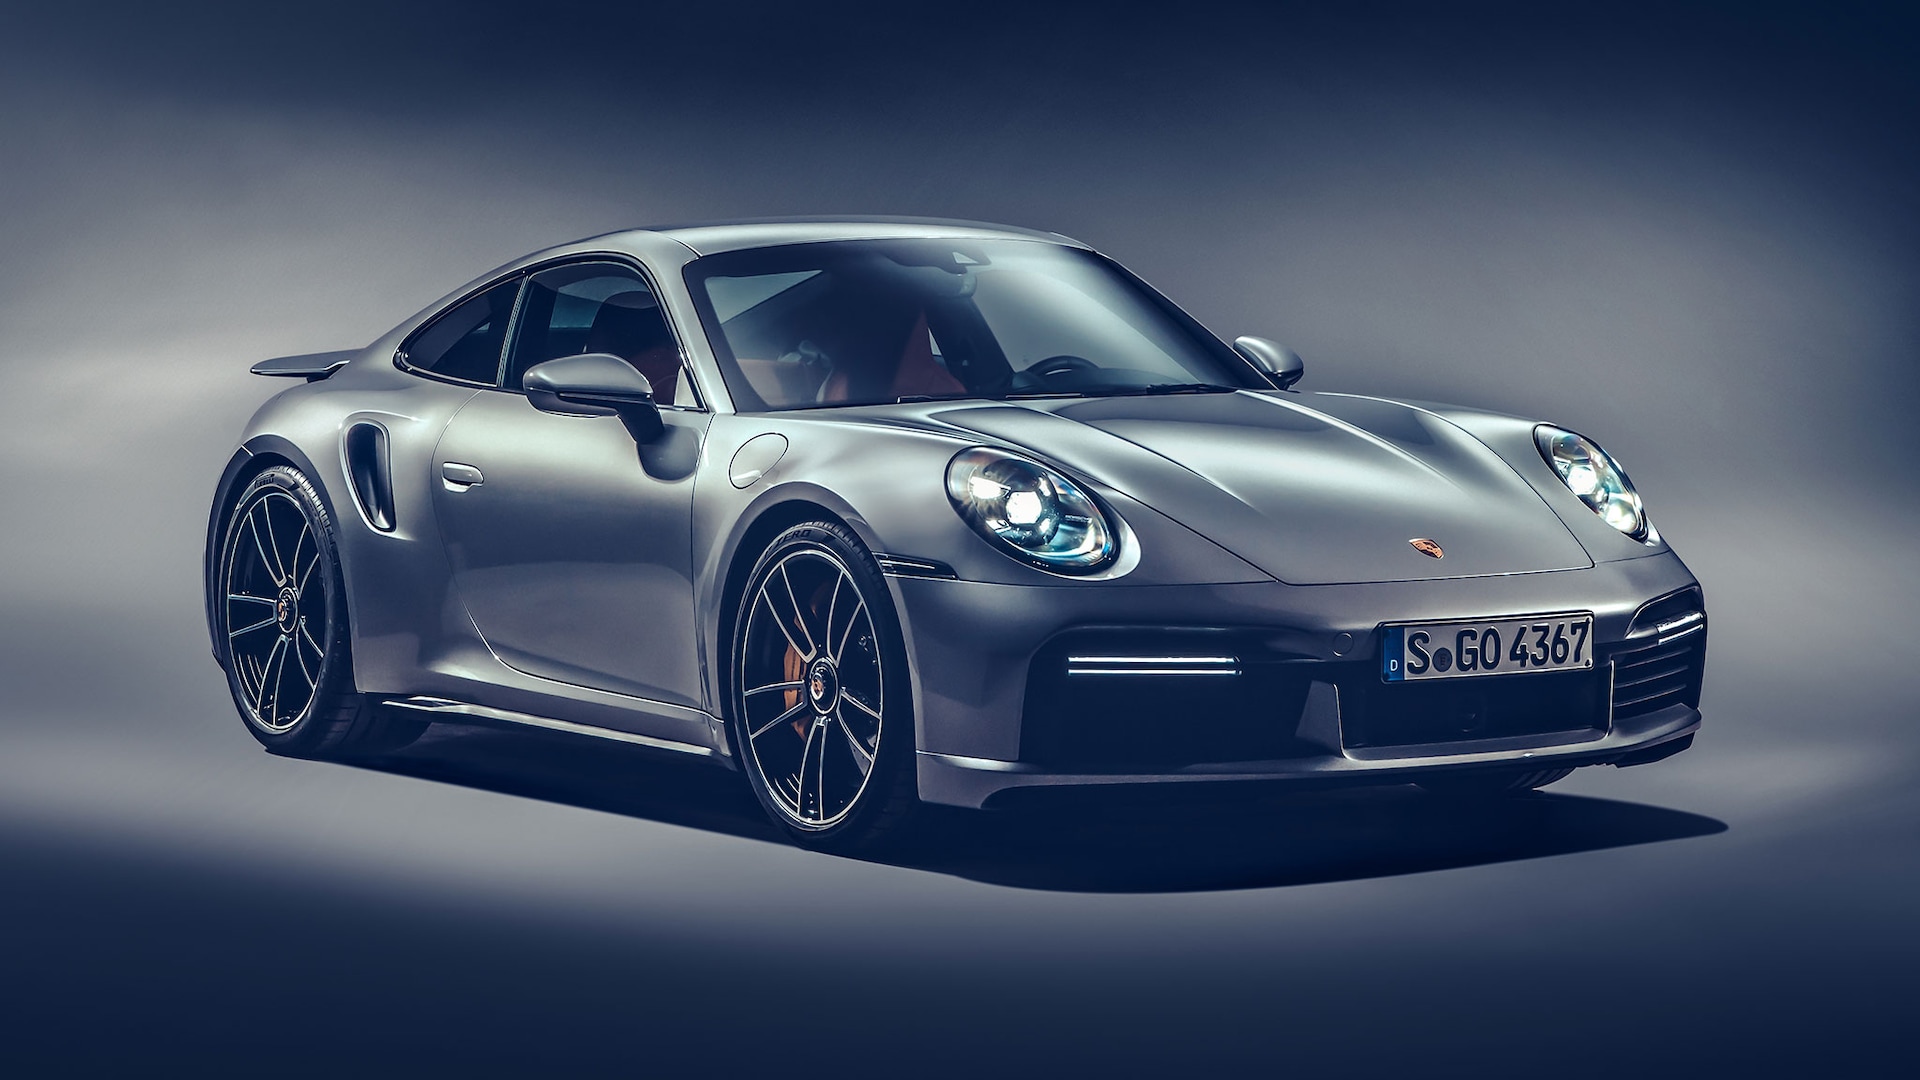 2021 Porsche 911 Turbo S: The Most Powerful and Quickest Yet